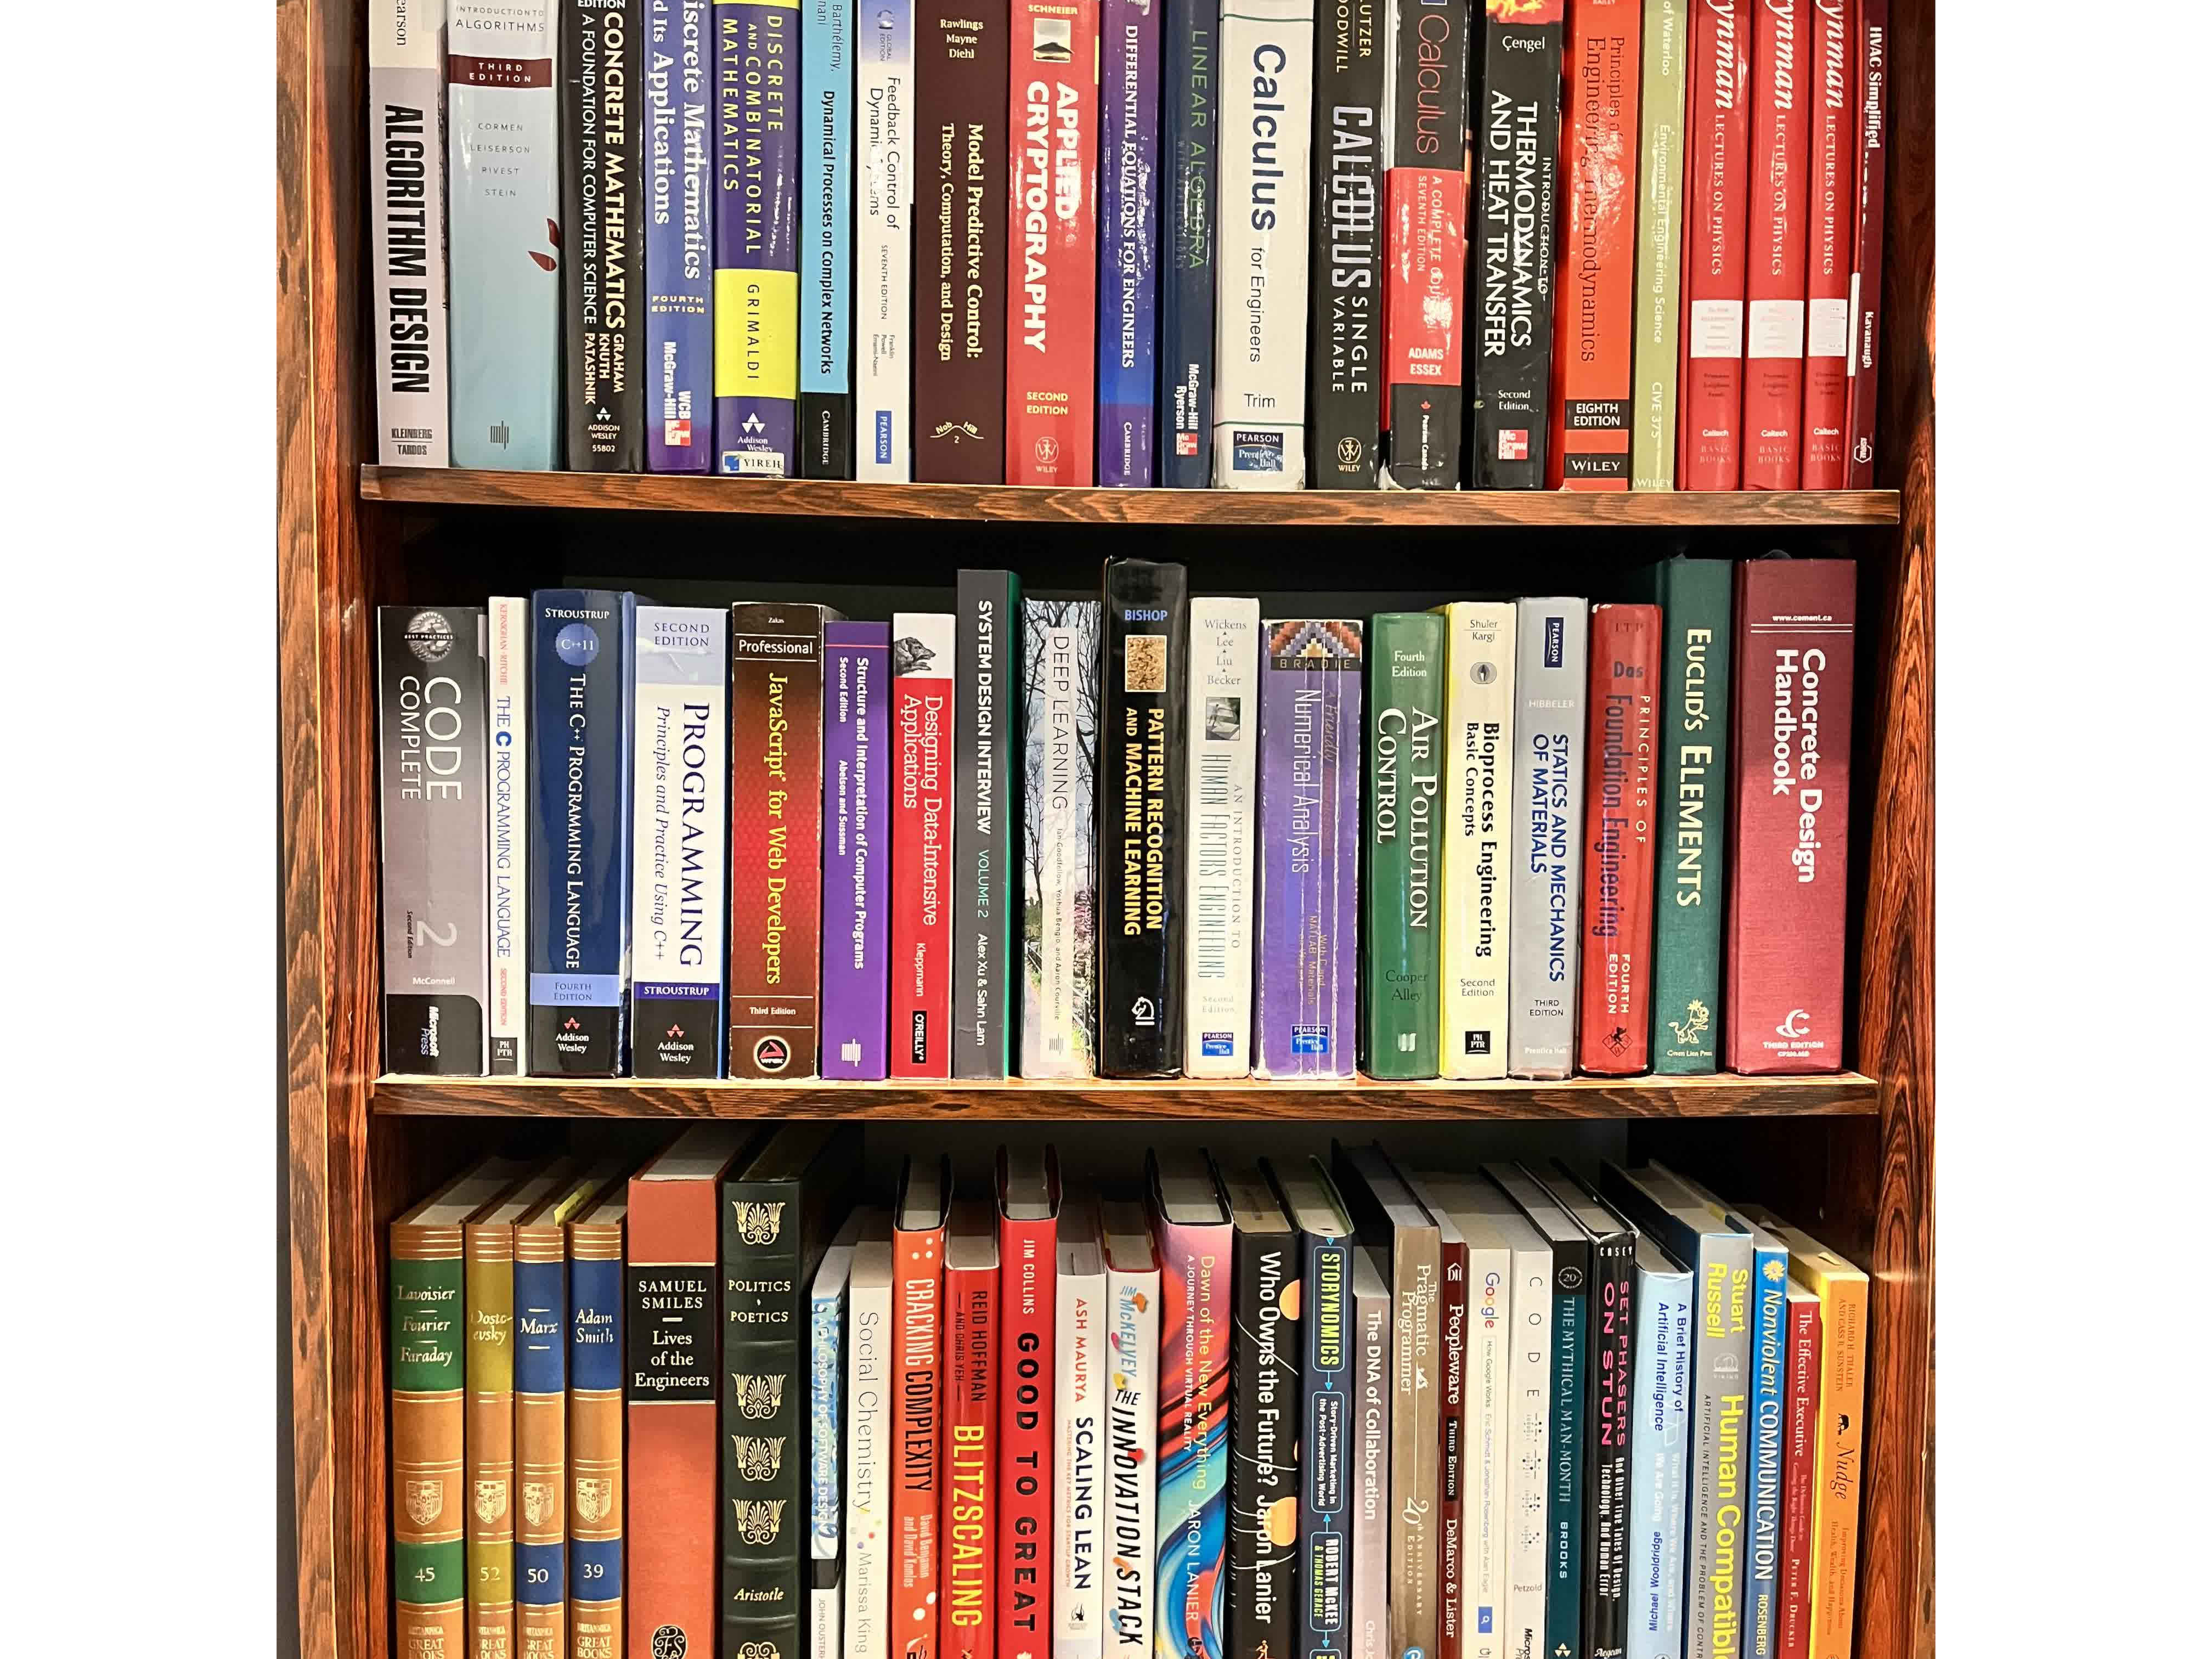 Most of the programming and maths books on my bookshelf